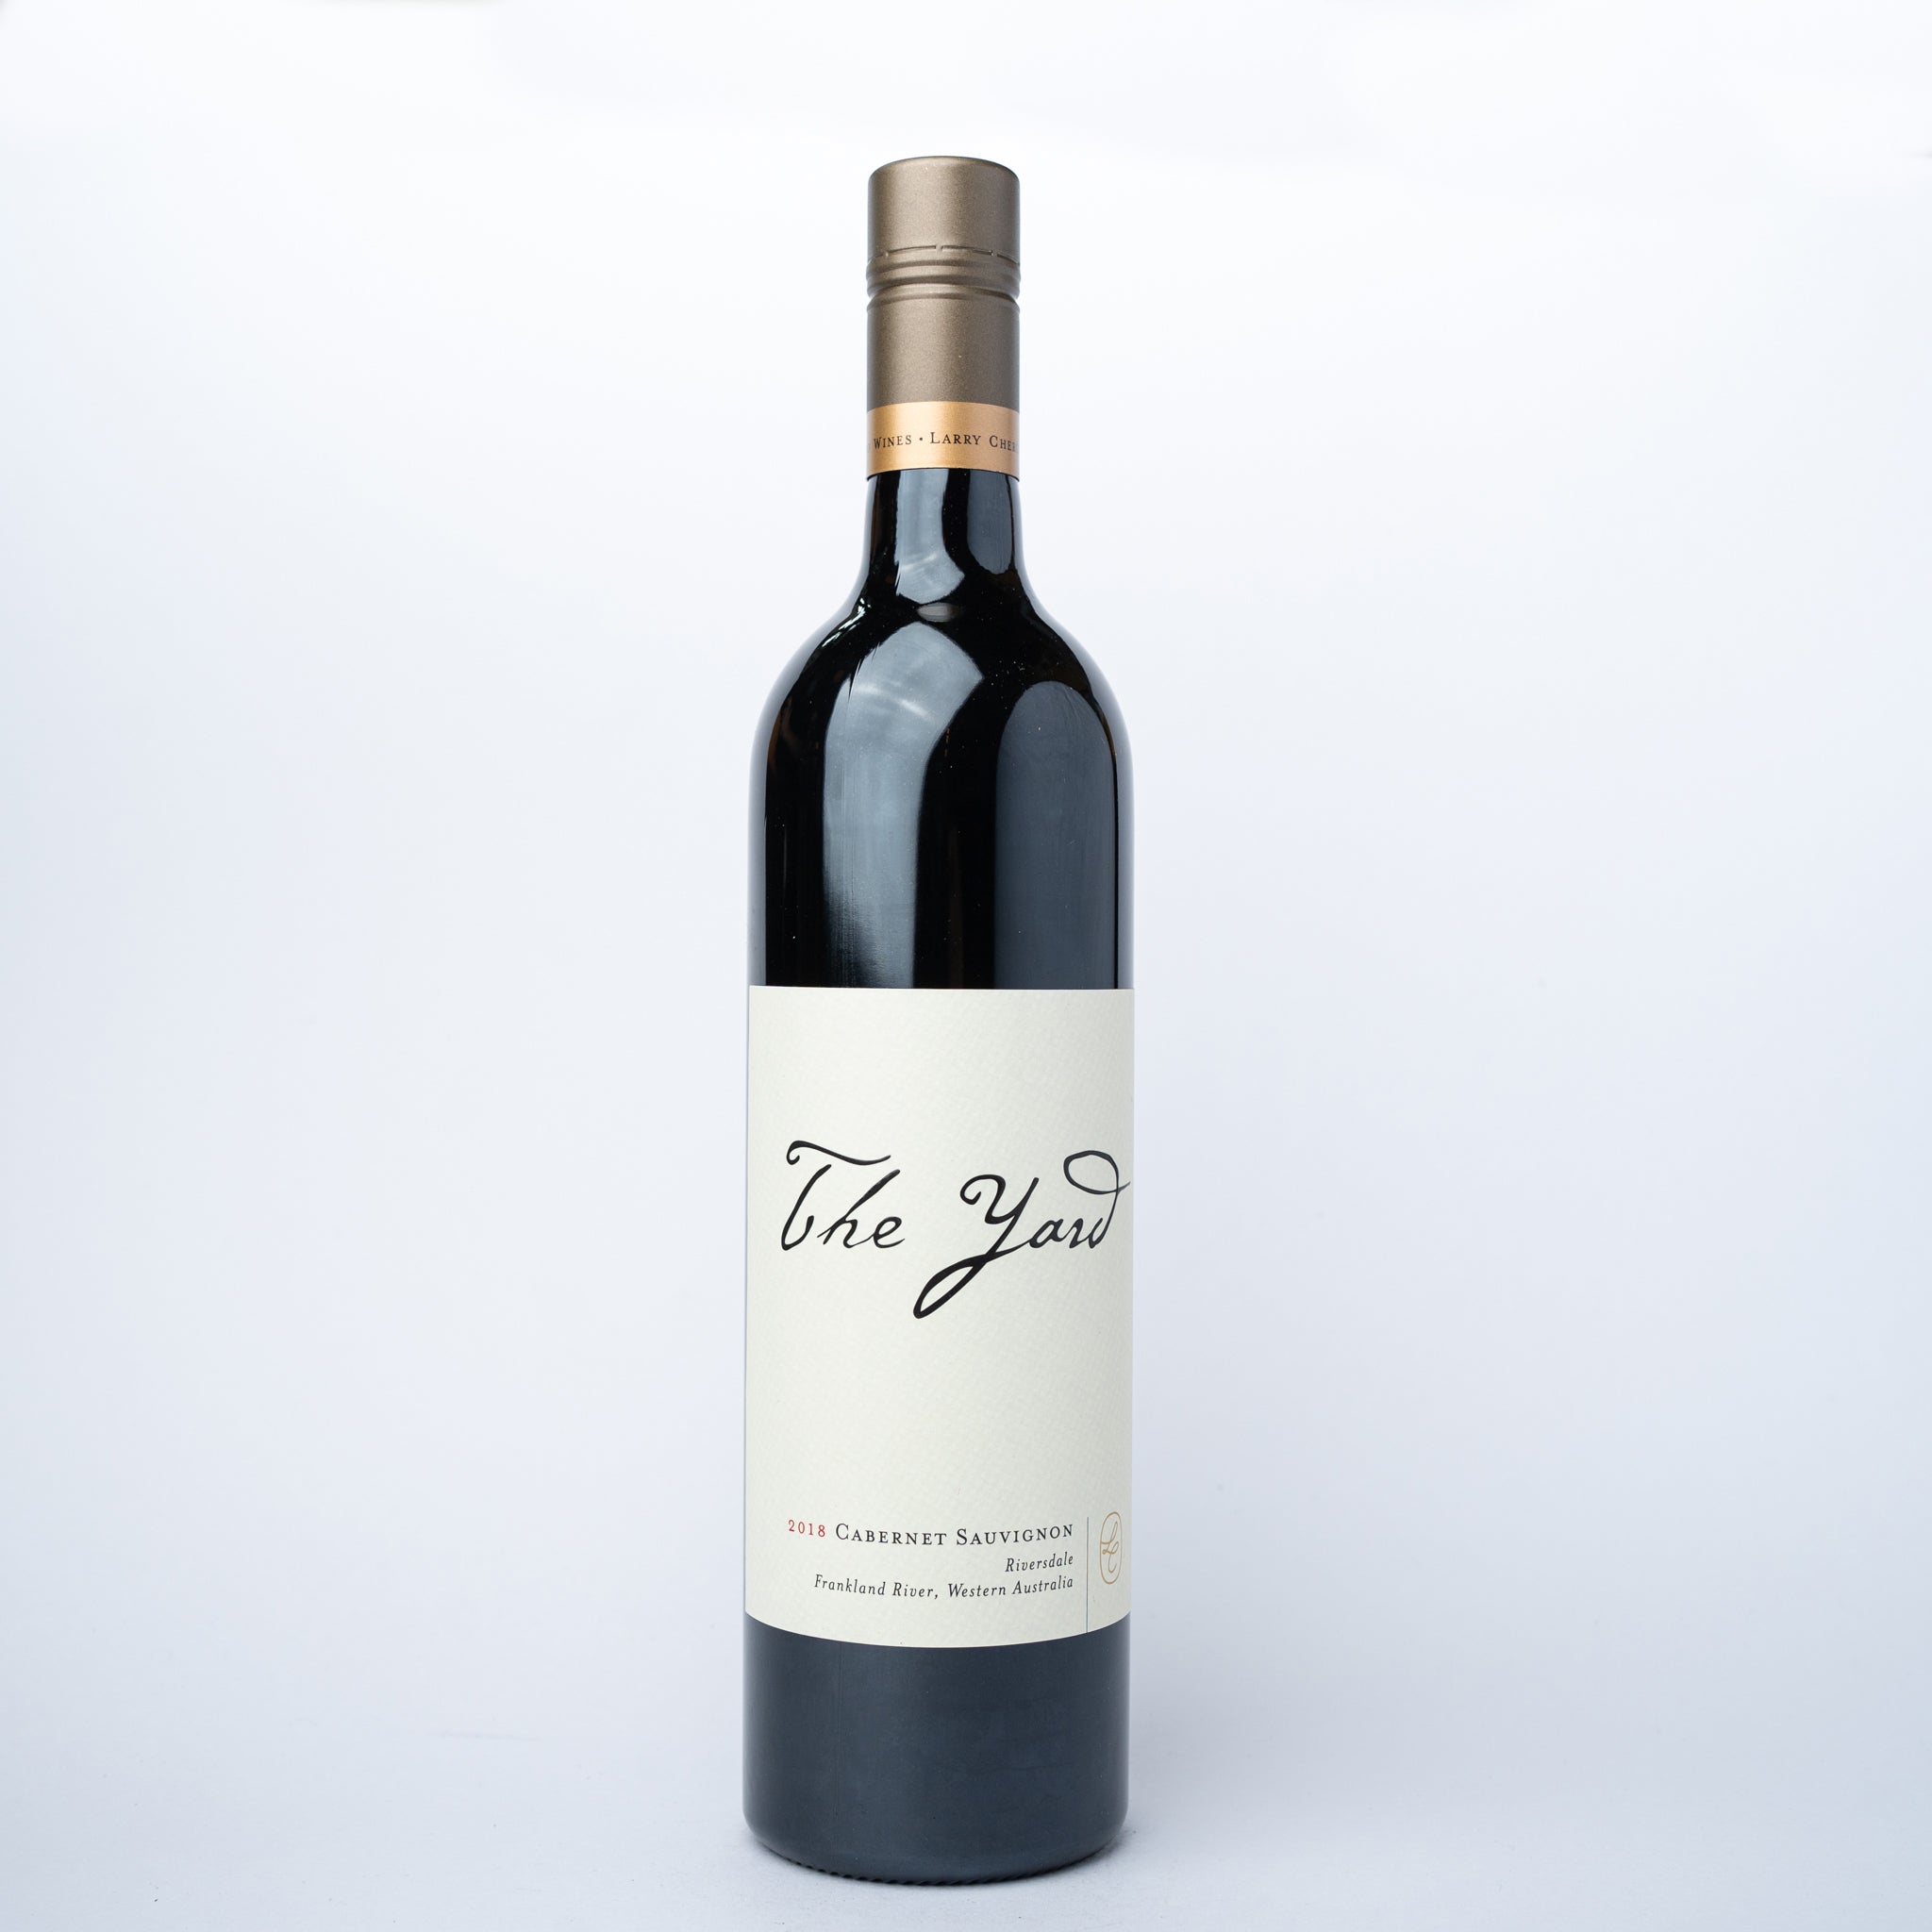 A 750ml glass bottle of 	 The Yard Cabernet Sauvignon 2018 red wine.